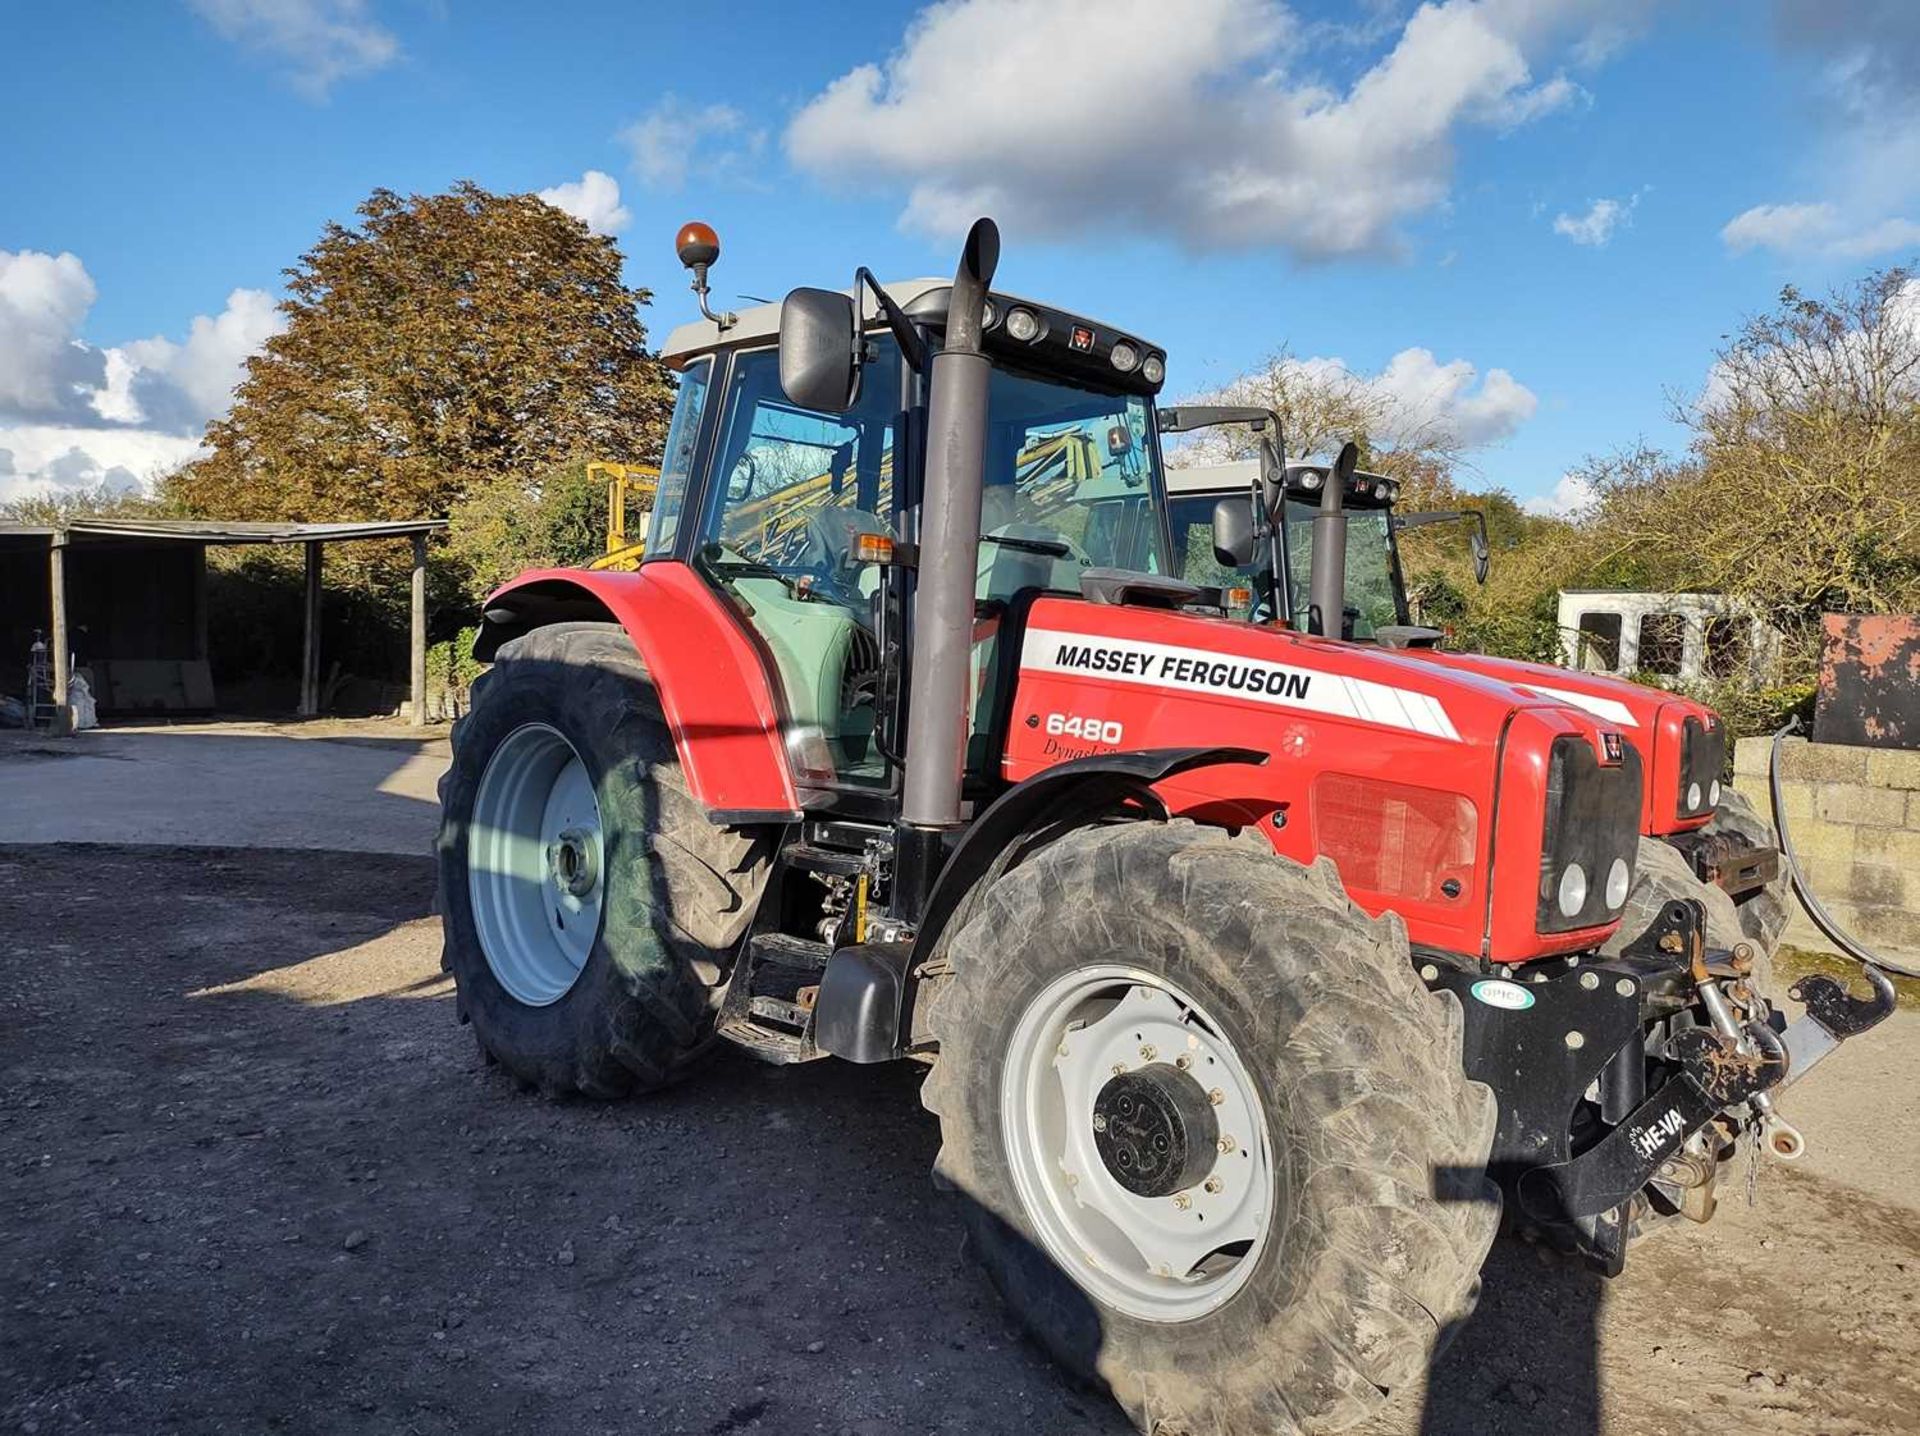 Massey Ferguson 6480 Dynashift Tractor with Opico Front Linkage. 5,799 Hrs. 3 Spools. Reg: AY54 CEA. - Image 2 of 8